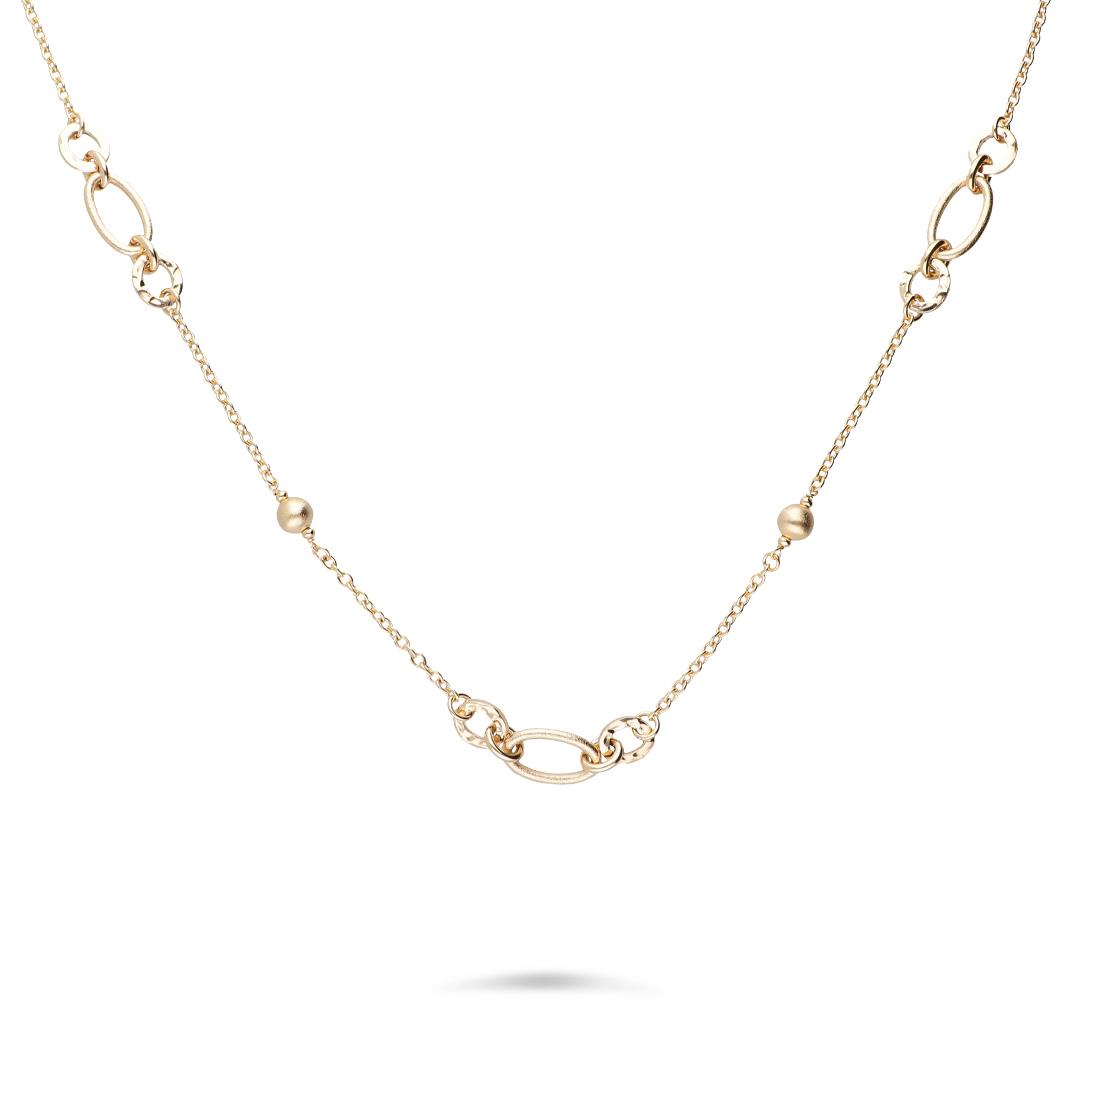 Gold plated necklace - TOSCANA BY ETRUSCA